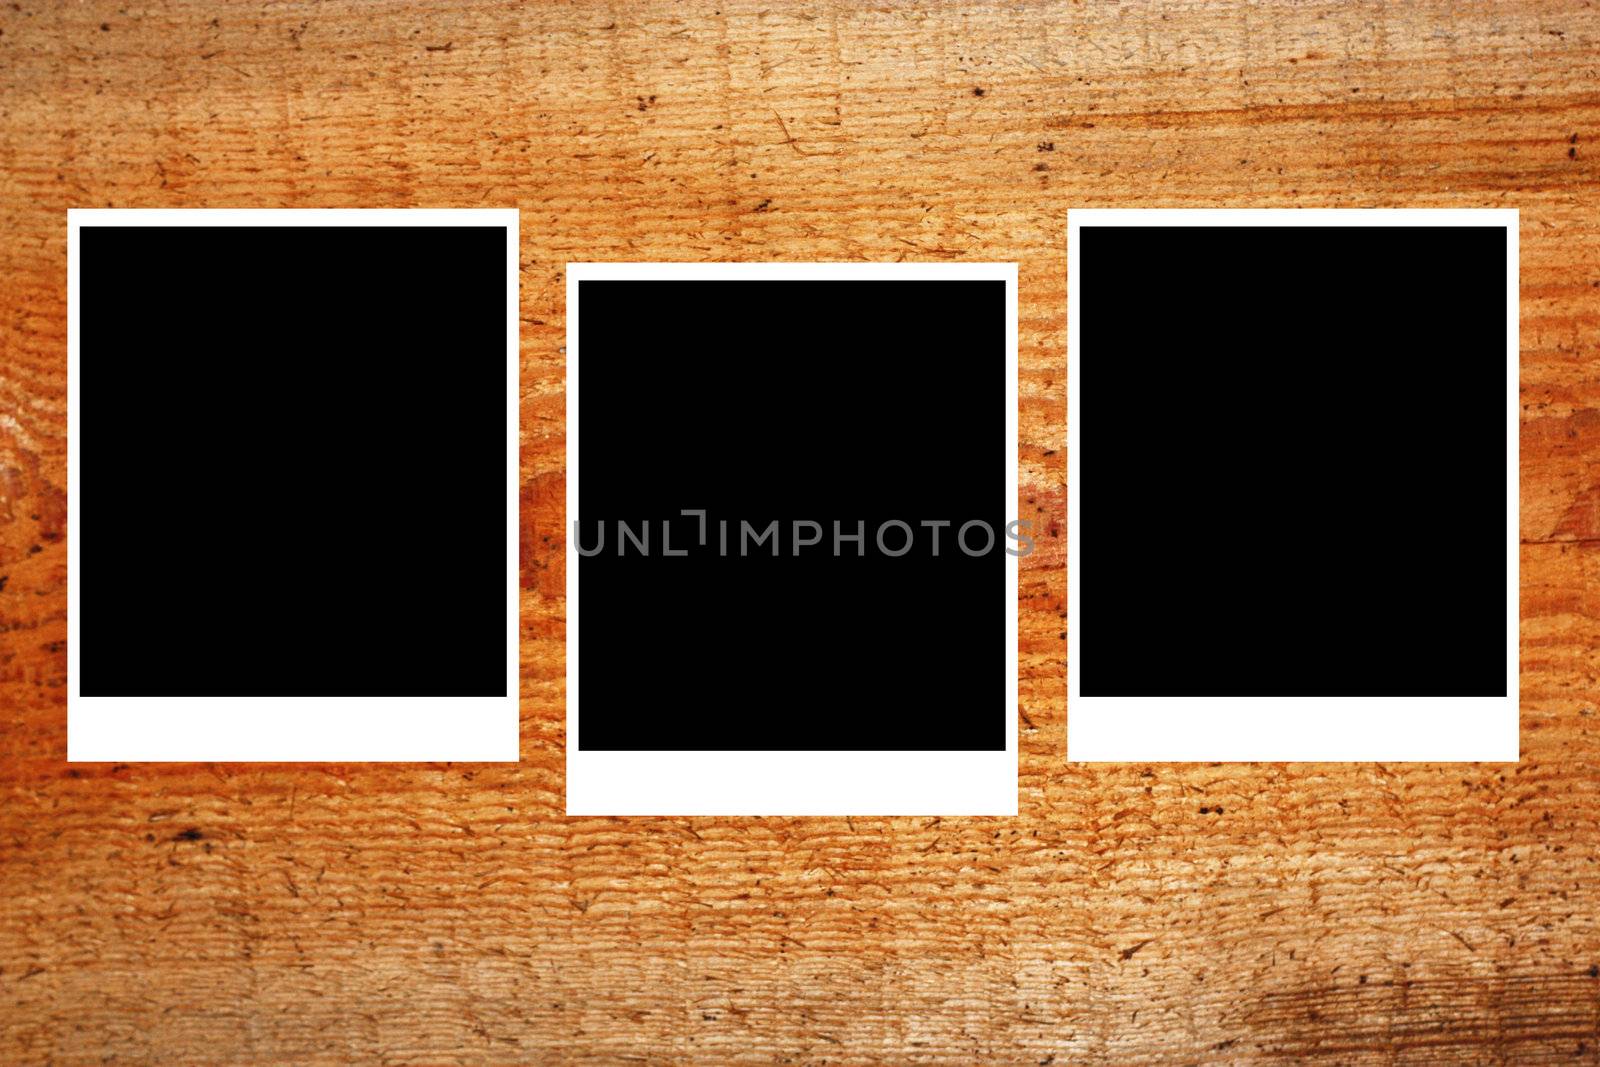 set of three old blank polaroids frames lying on a wood surface 